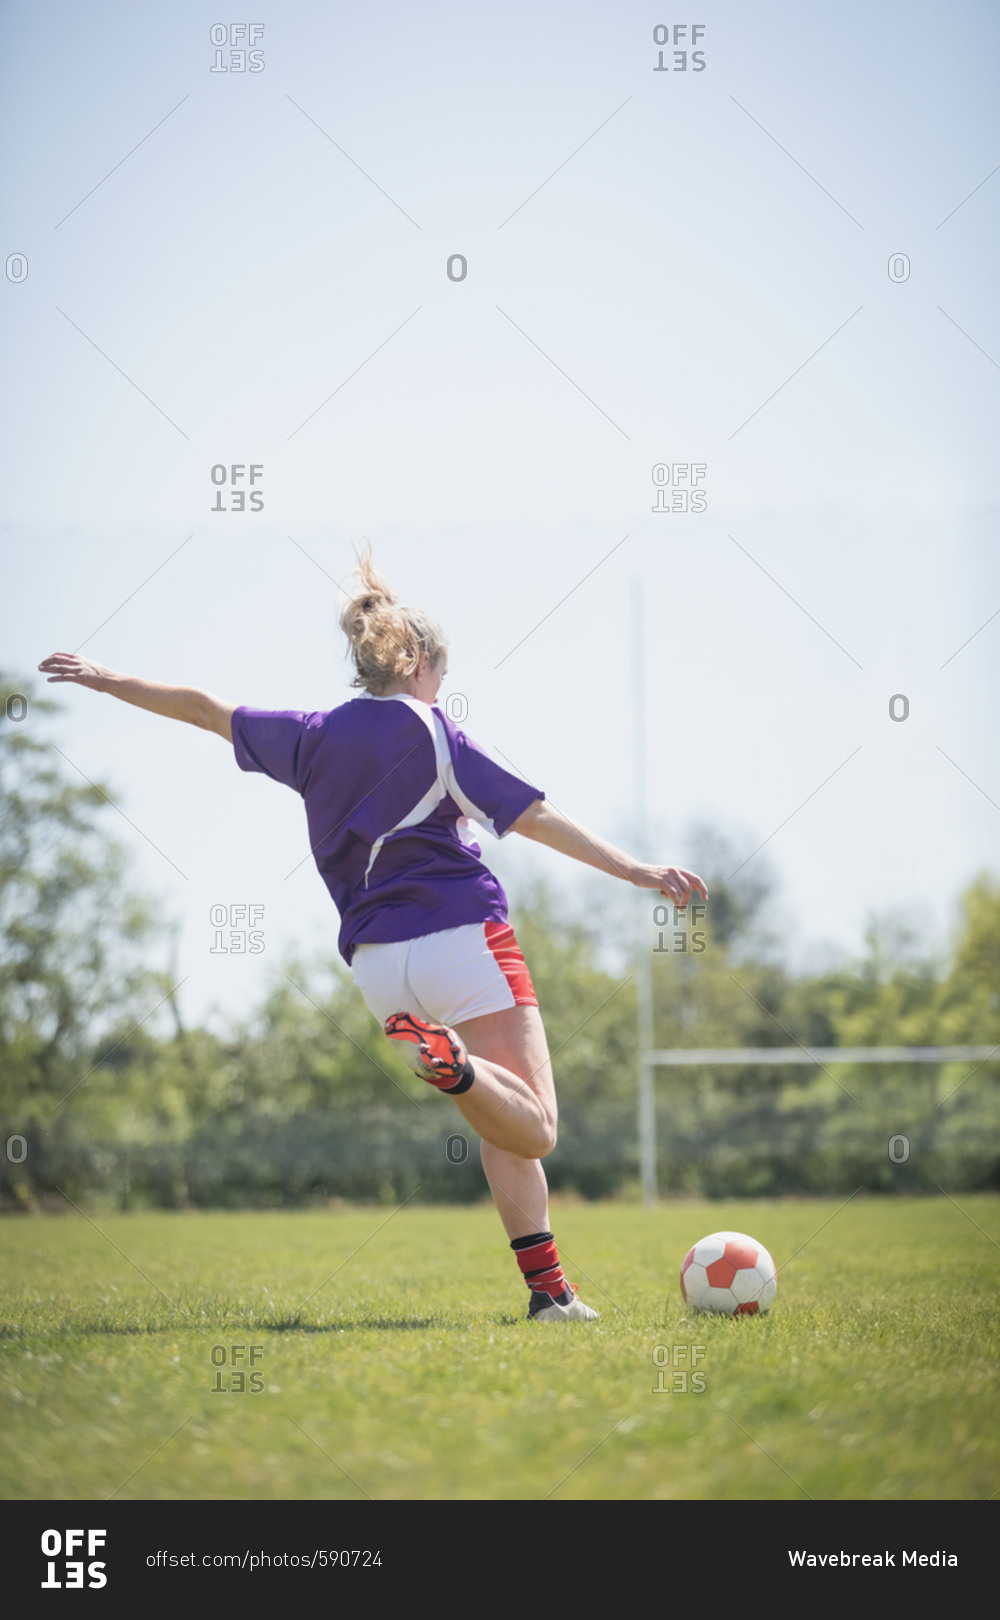 Rear view of woman kicking soccer ball on field against clear sky